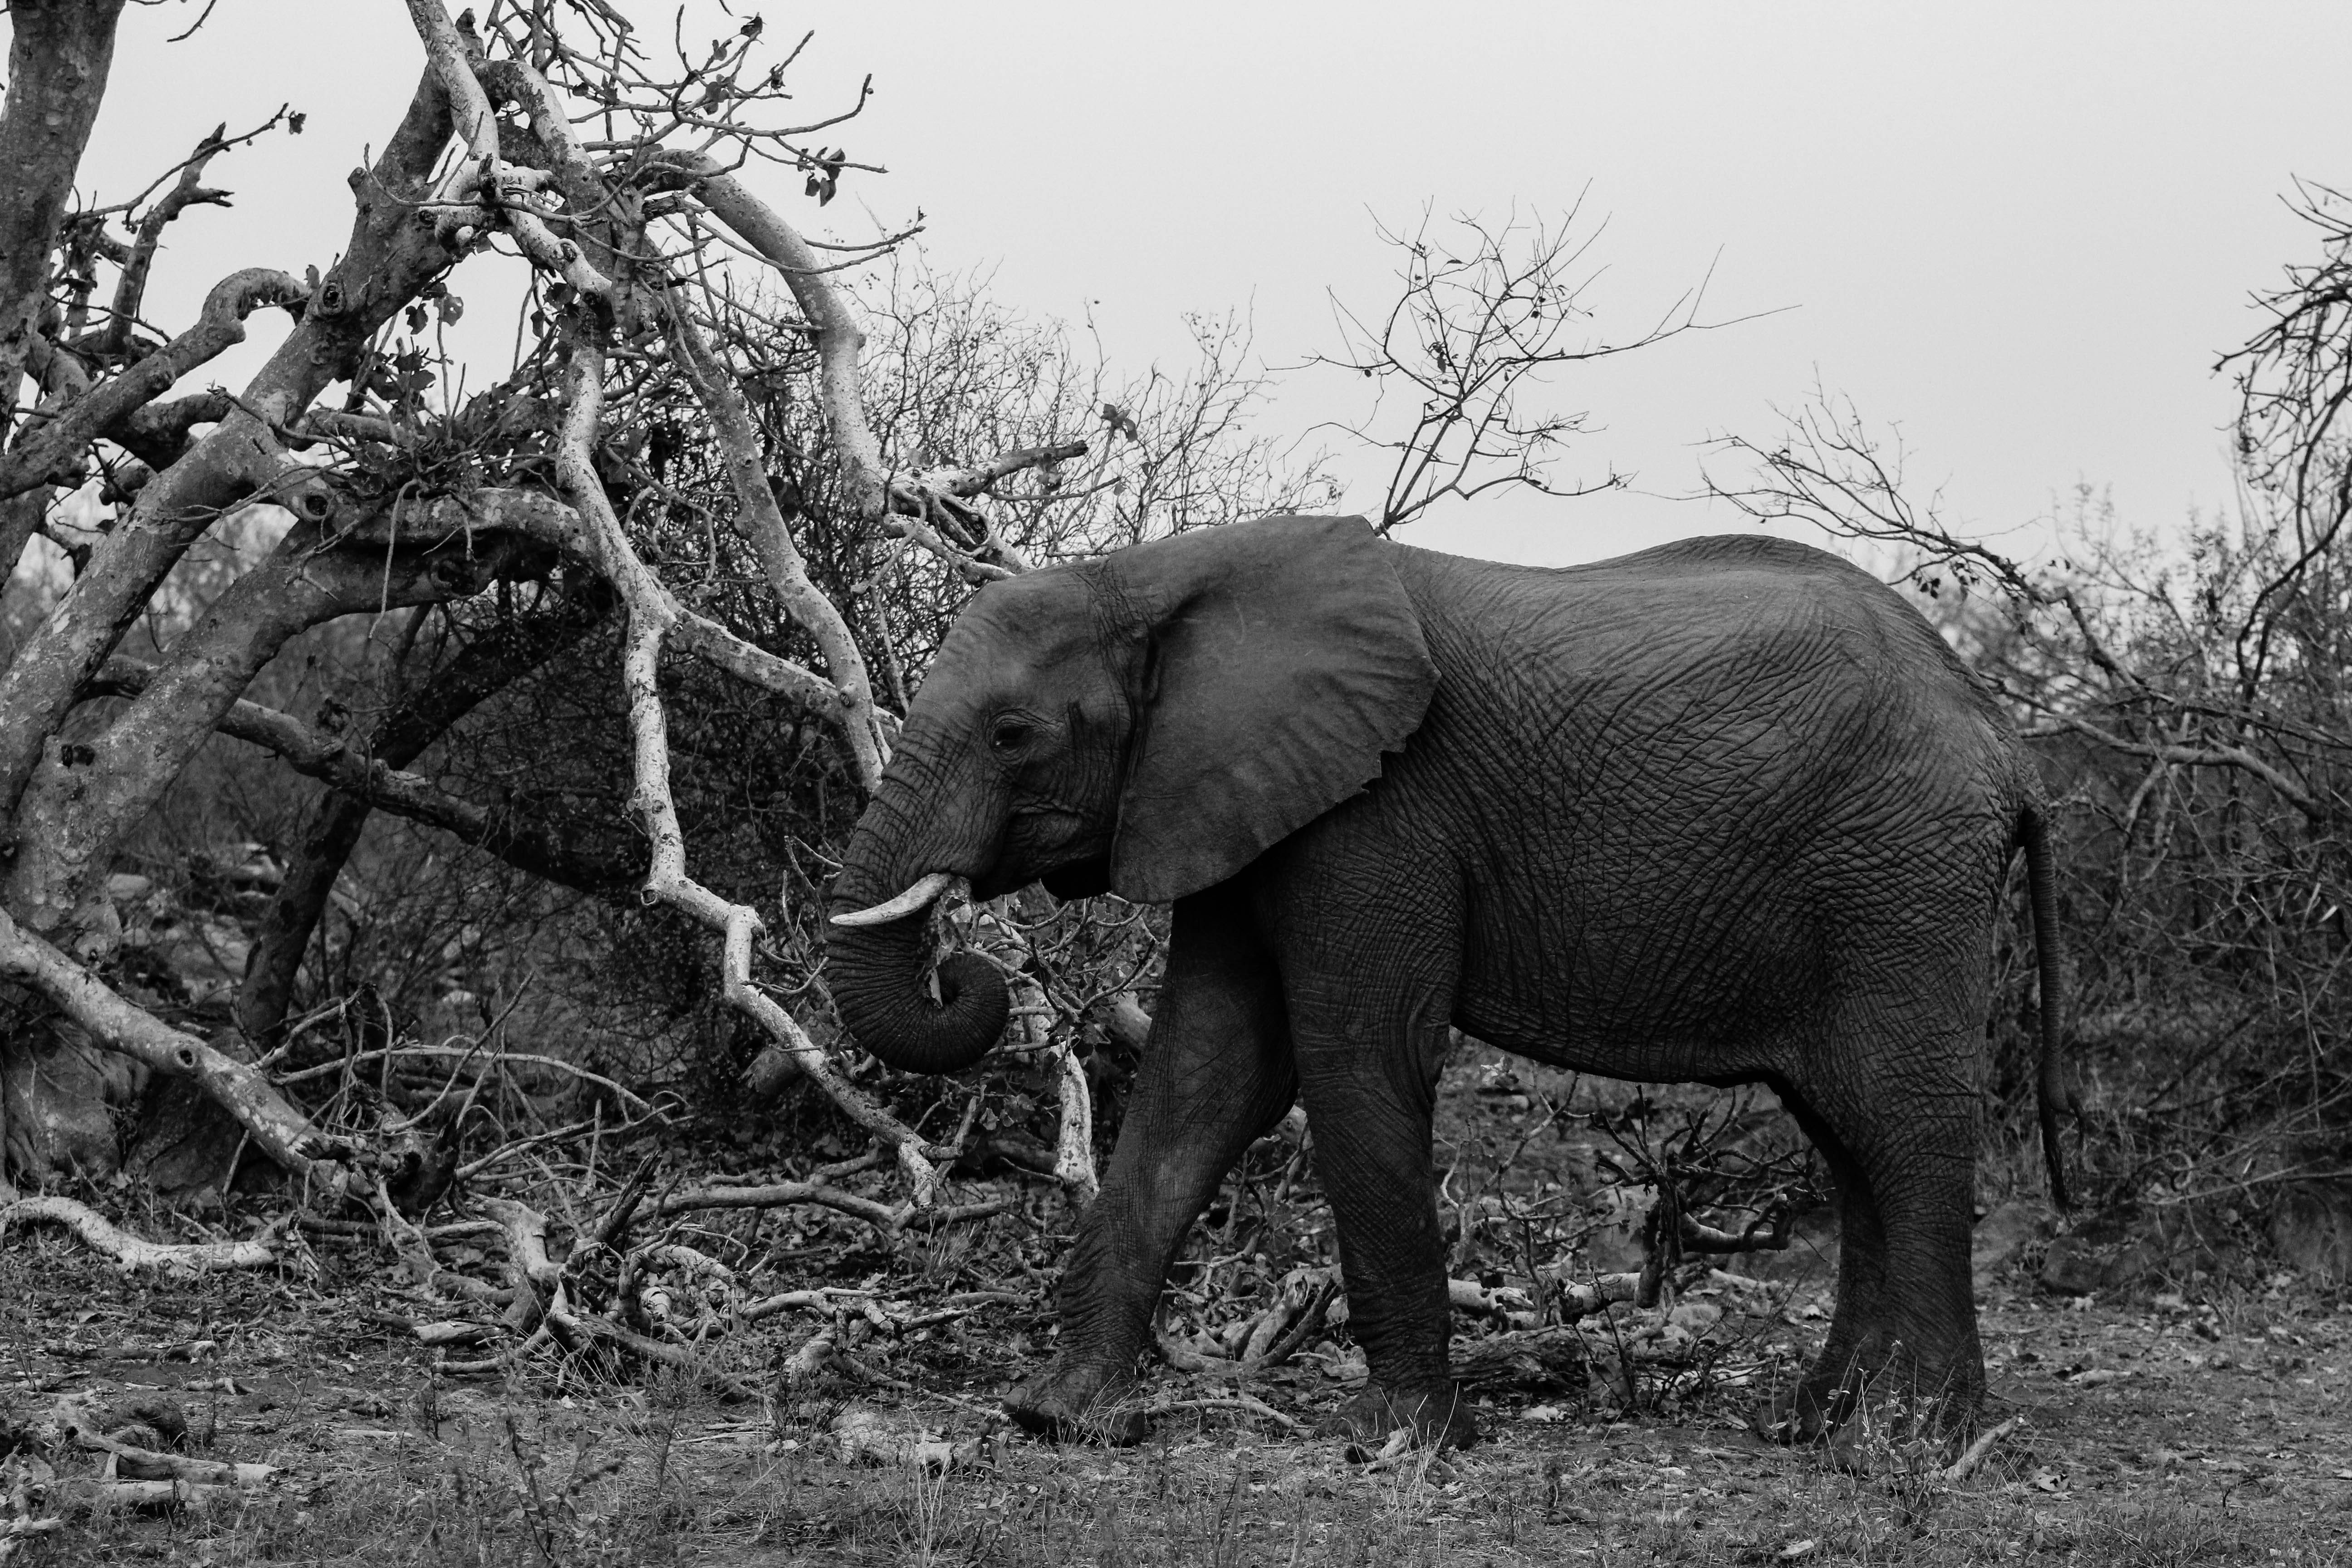 grayscale photo of elephant walking nears withered trees